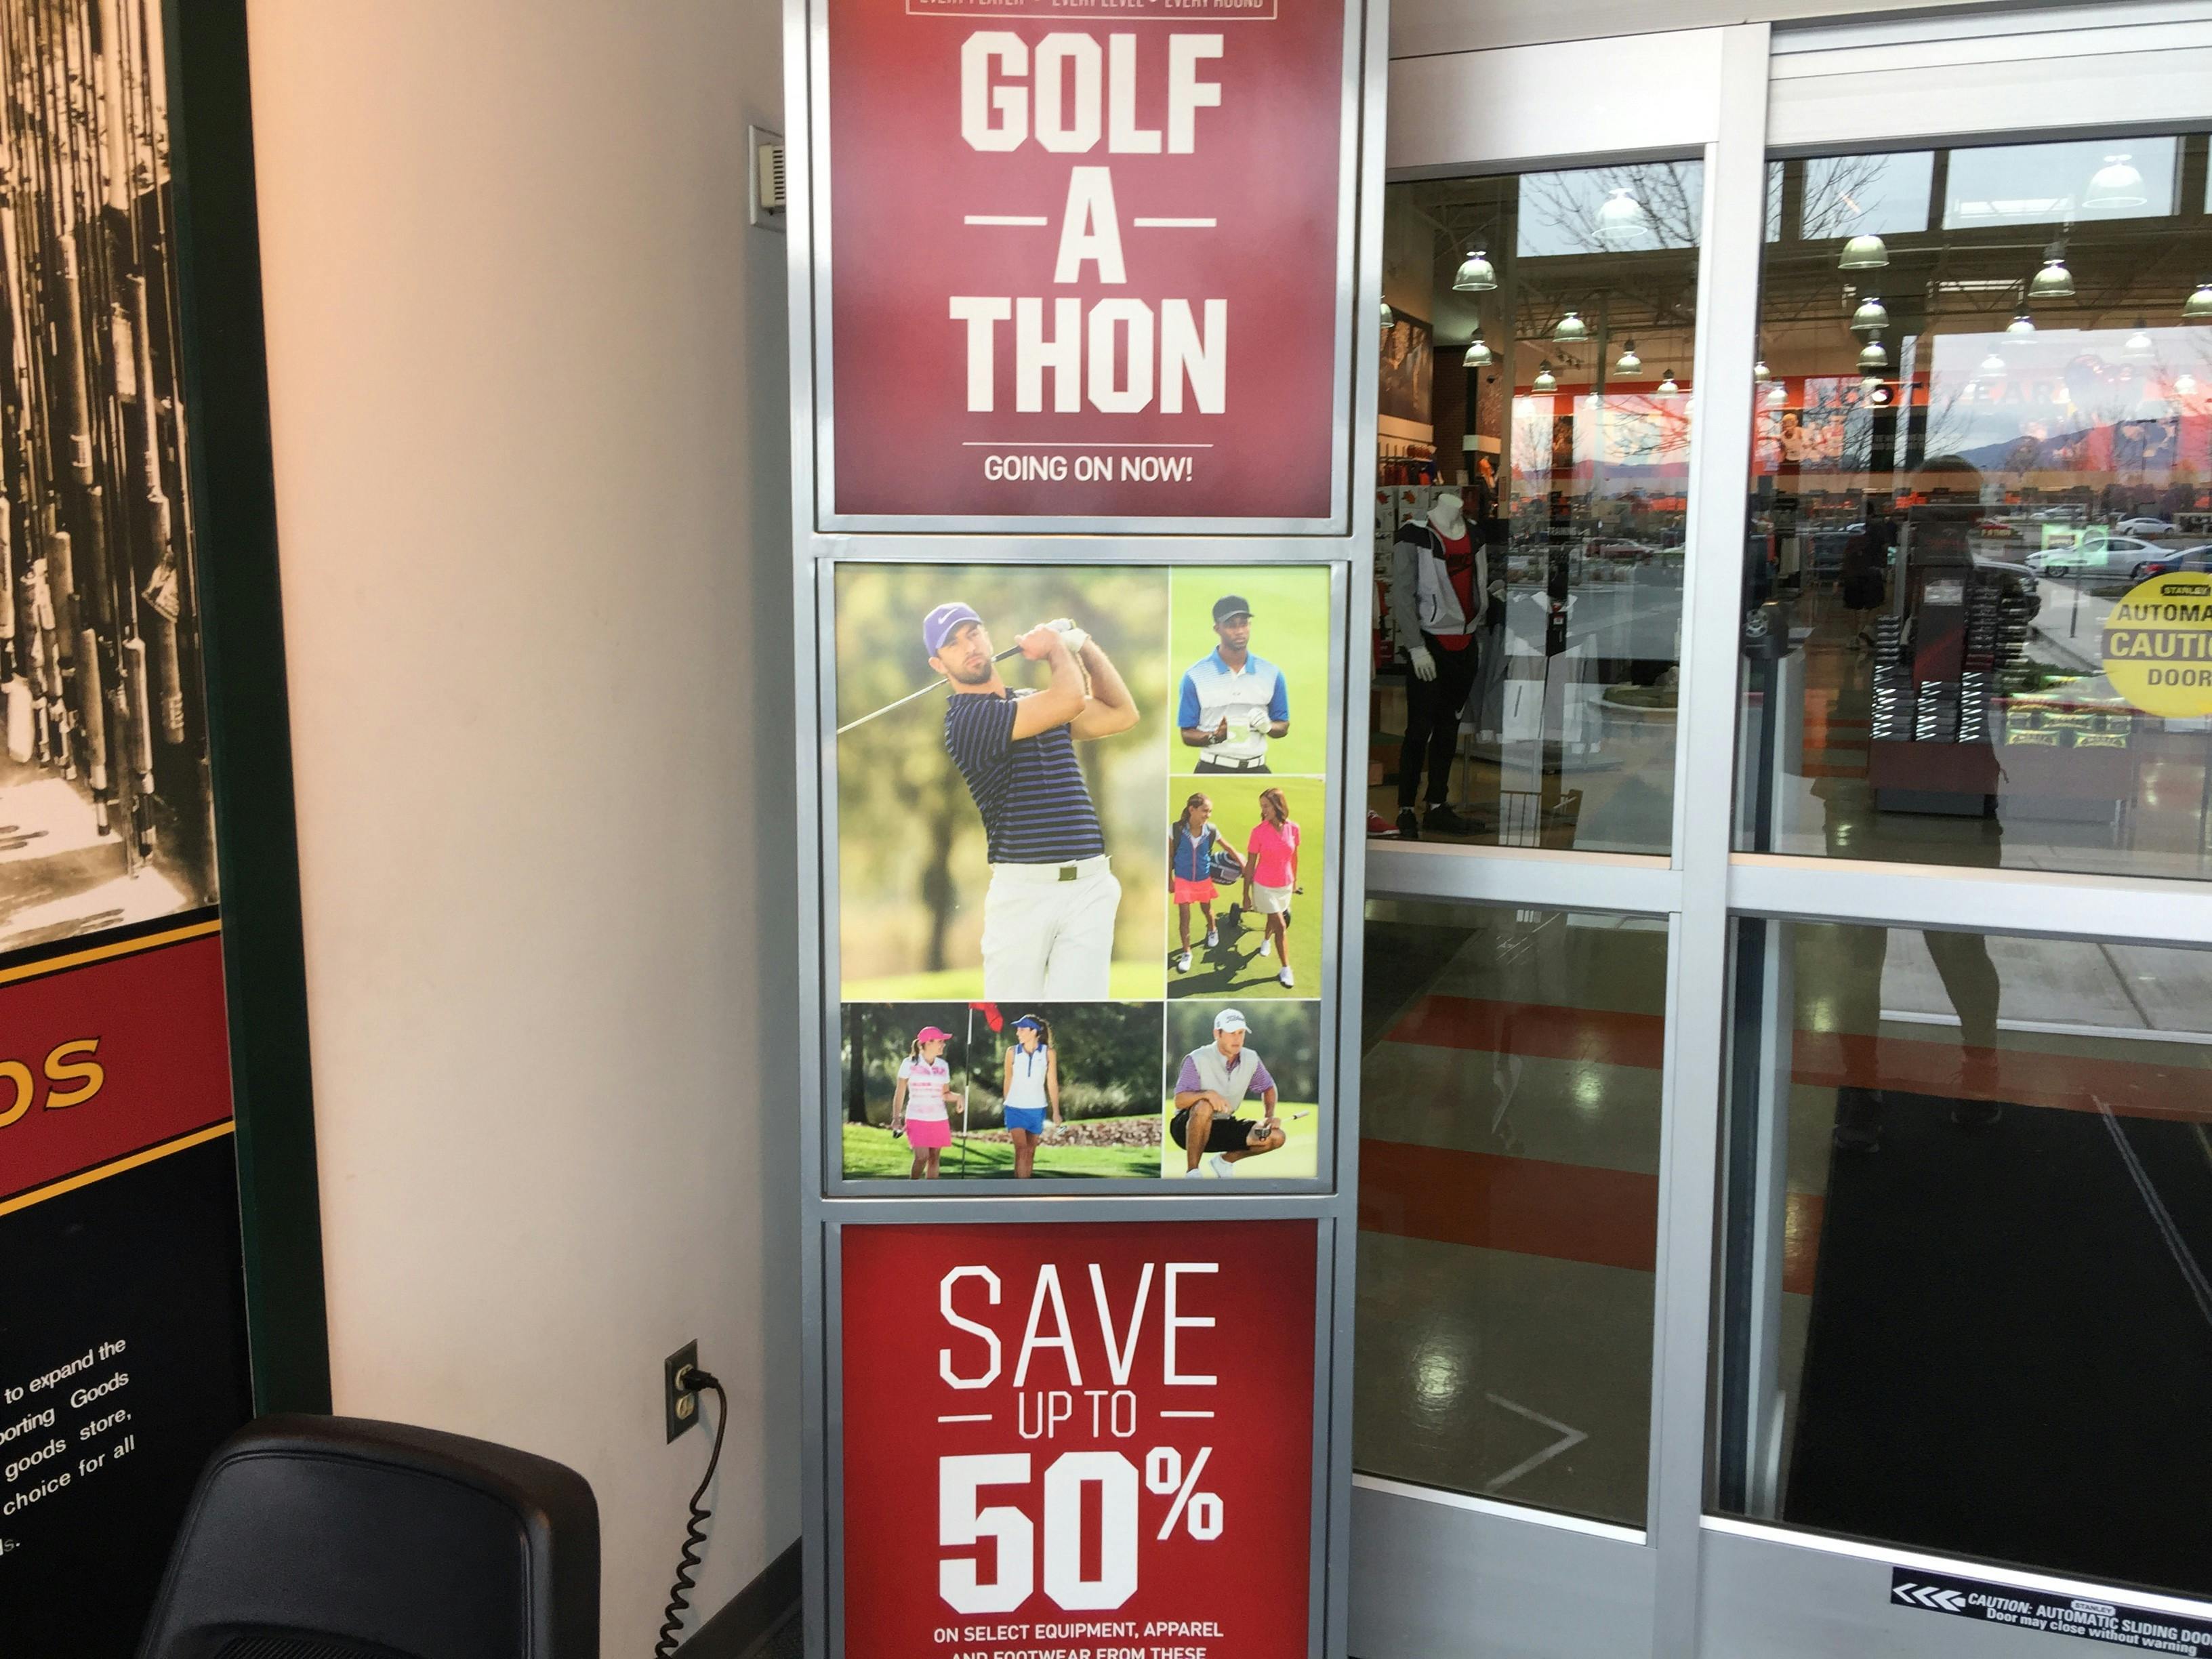 A large sign at the entrance of a Dick's Sporting Goods, advertising the Golf-A-Thon sale.